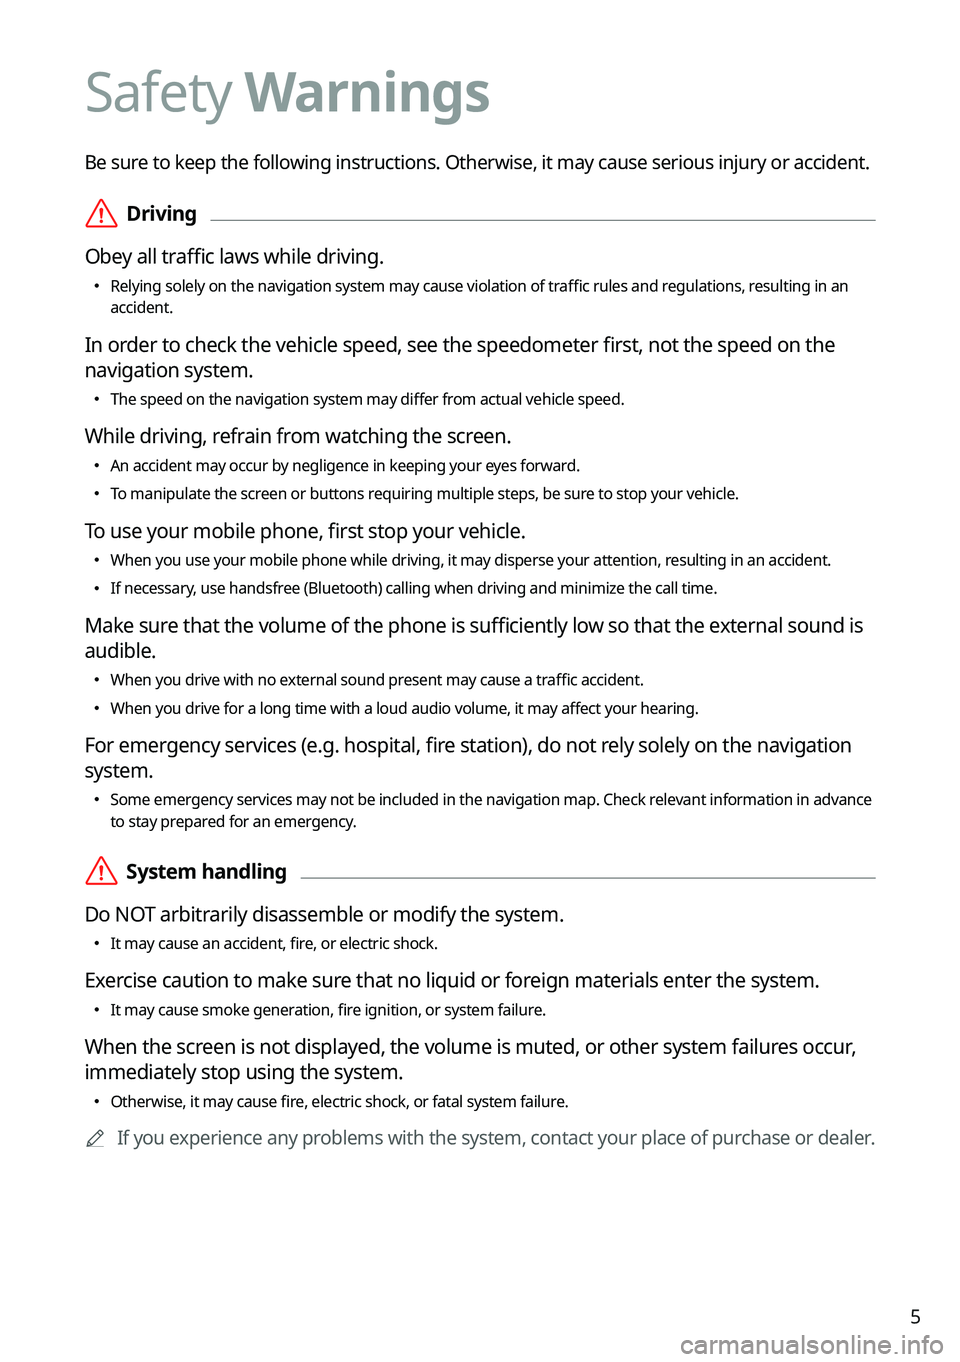 KIA SOUL 2023  Quick Reference Guide 5
Be sure to keep the following instructions. Otherwise, it may cause serious injury or accident.
 ÝDriving
Obey all traffic laws while driving.
  Relying solely on the navigation system may cau